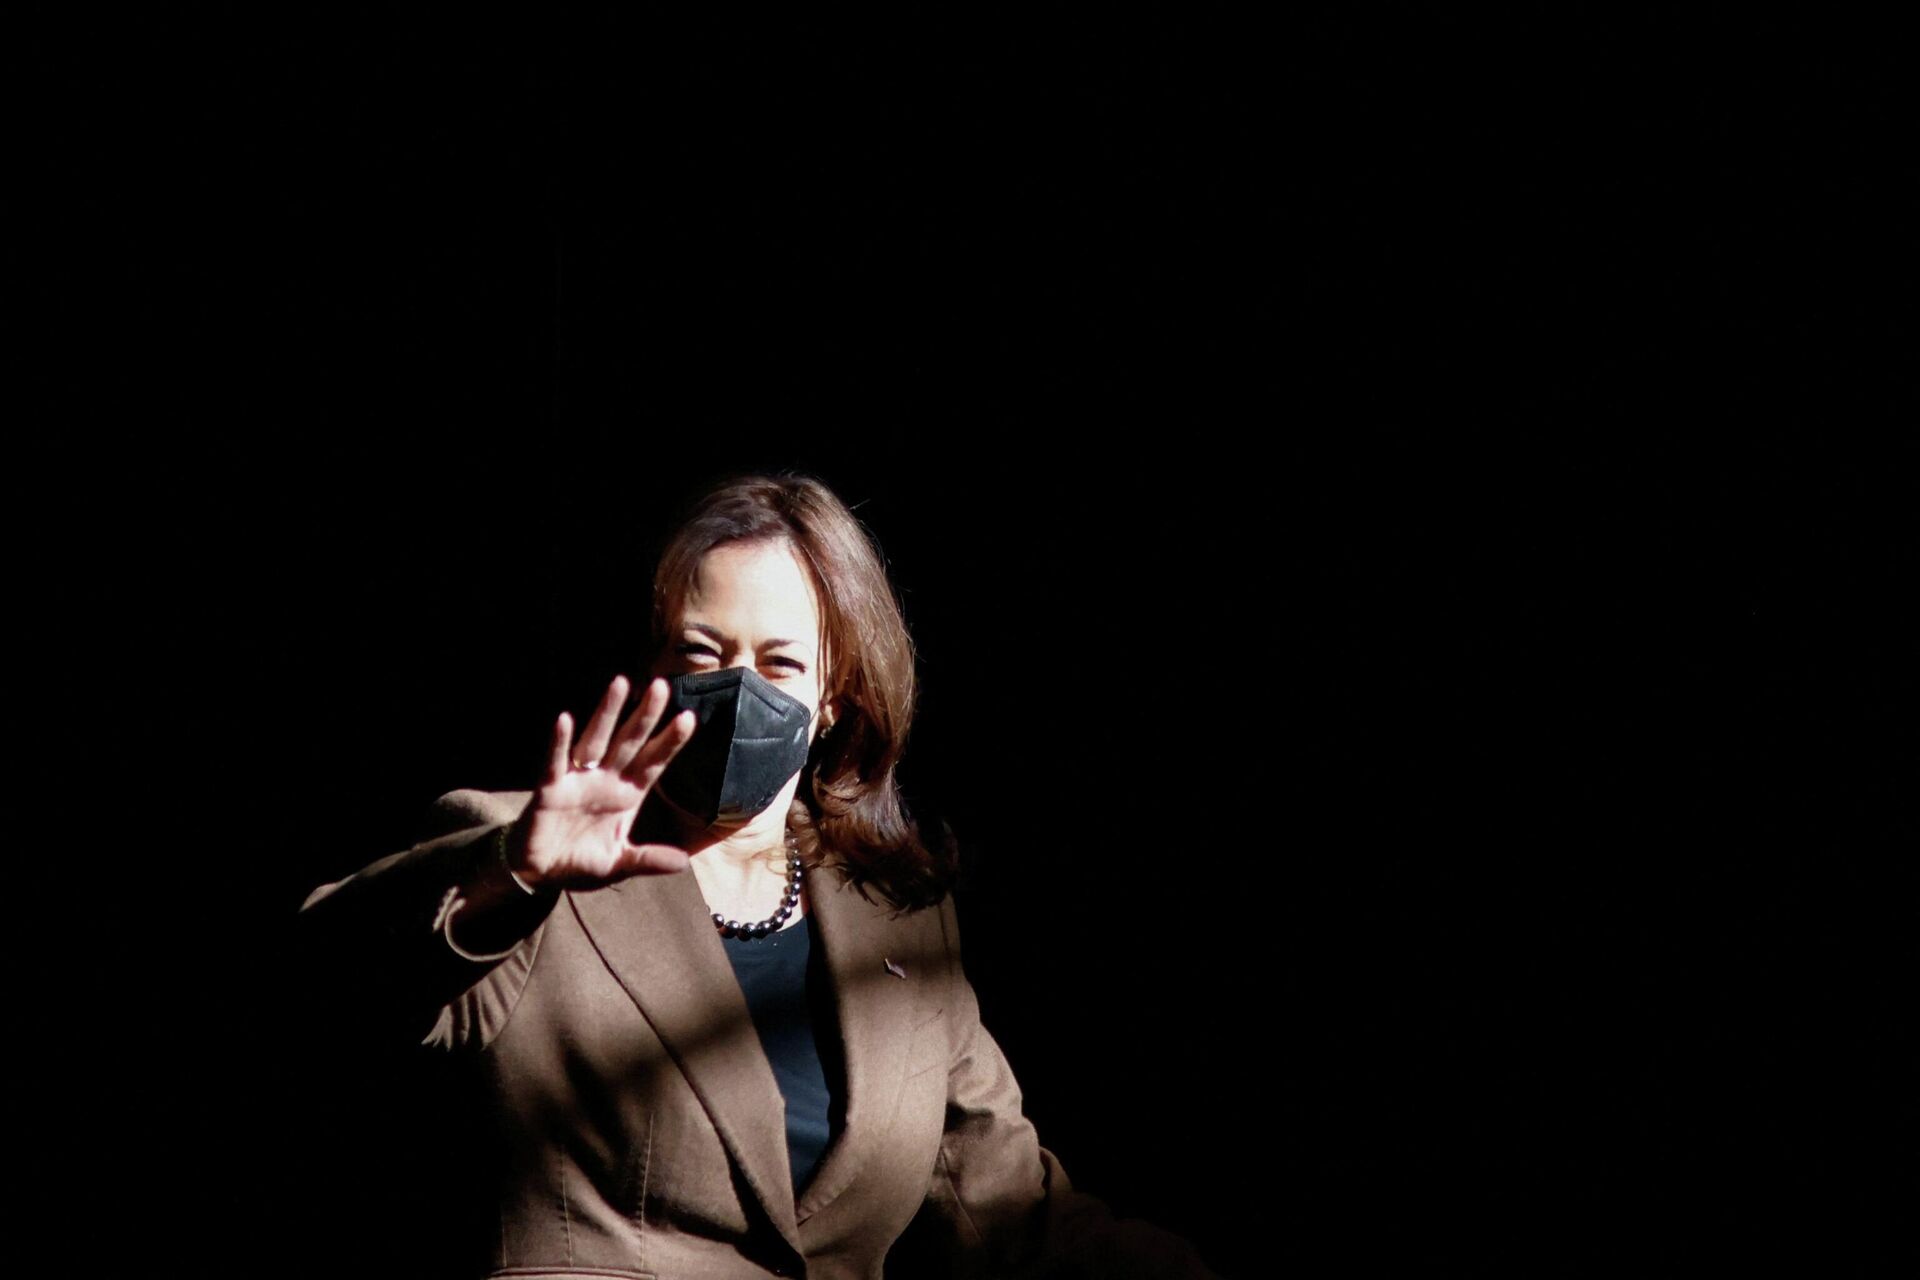 U.S. Vice President Kamala Harris arrives to attend an event to discuss “funding in the Bipartisan Infrastructure Law to remove and replace lead services lines across America,” at the Training Recreation Education Center in Newark, New Jersey, U.S., February 11, 2022. - Sputnik International, 1920, 07.03.2022